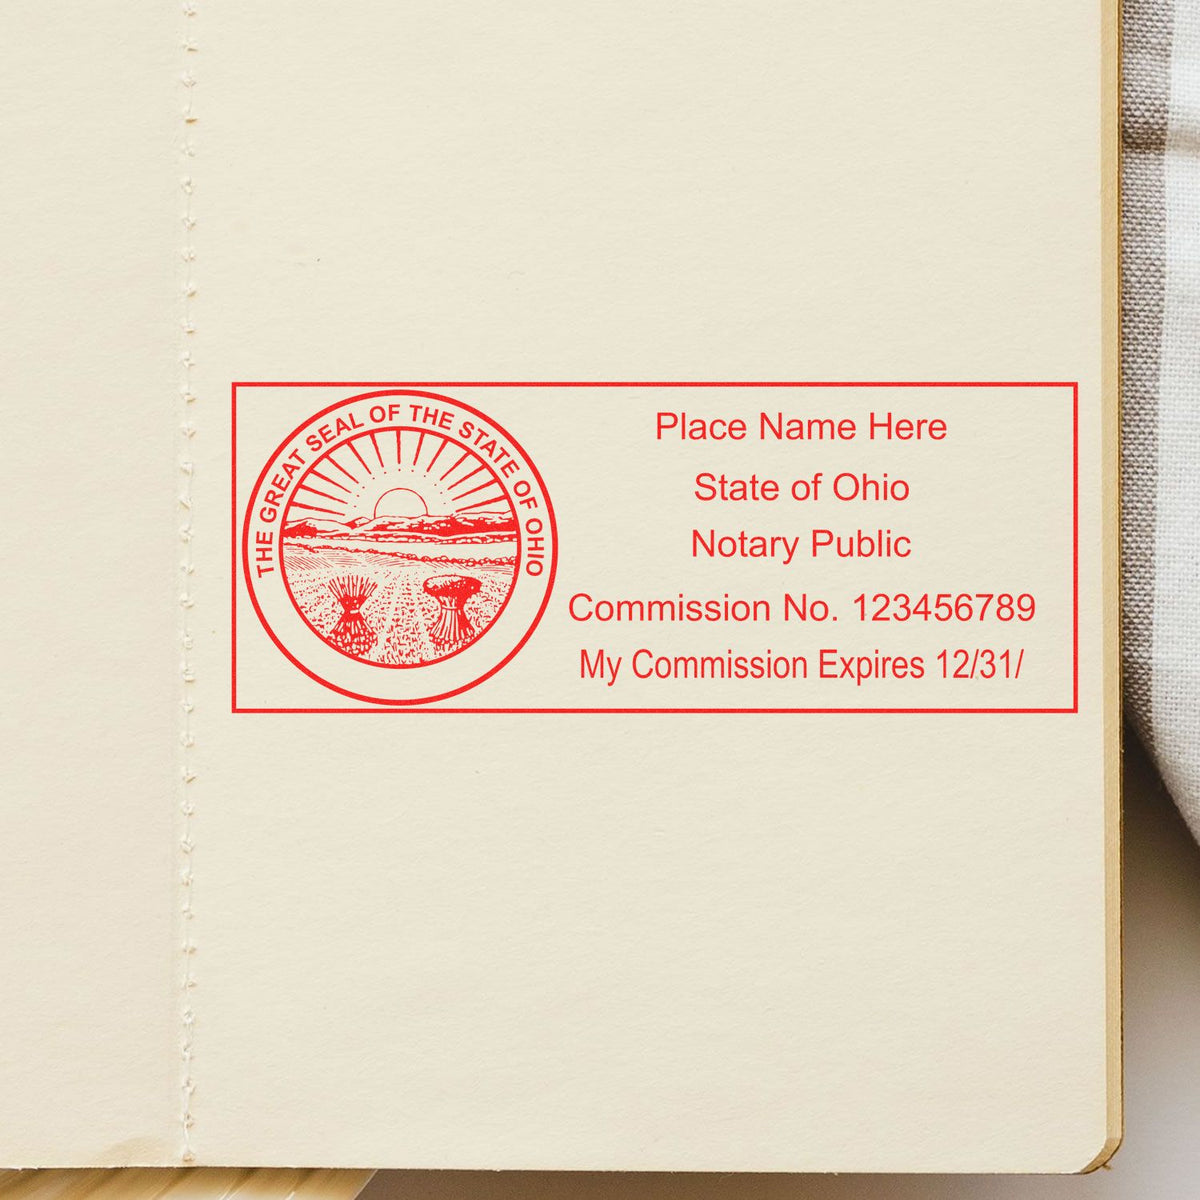 An alternative view of the MaxLight Premium Pre-Inked Ohio State Seal Notarial Stamp stamped on a sheet of paper showing the image in use